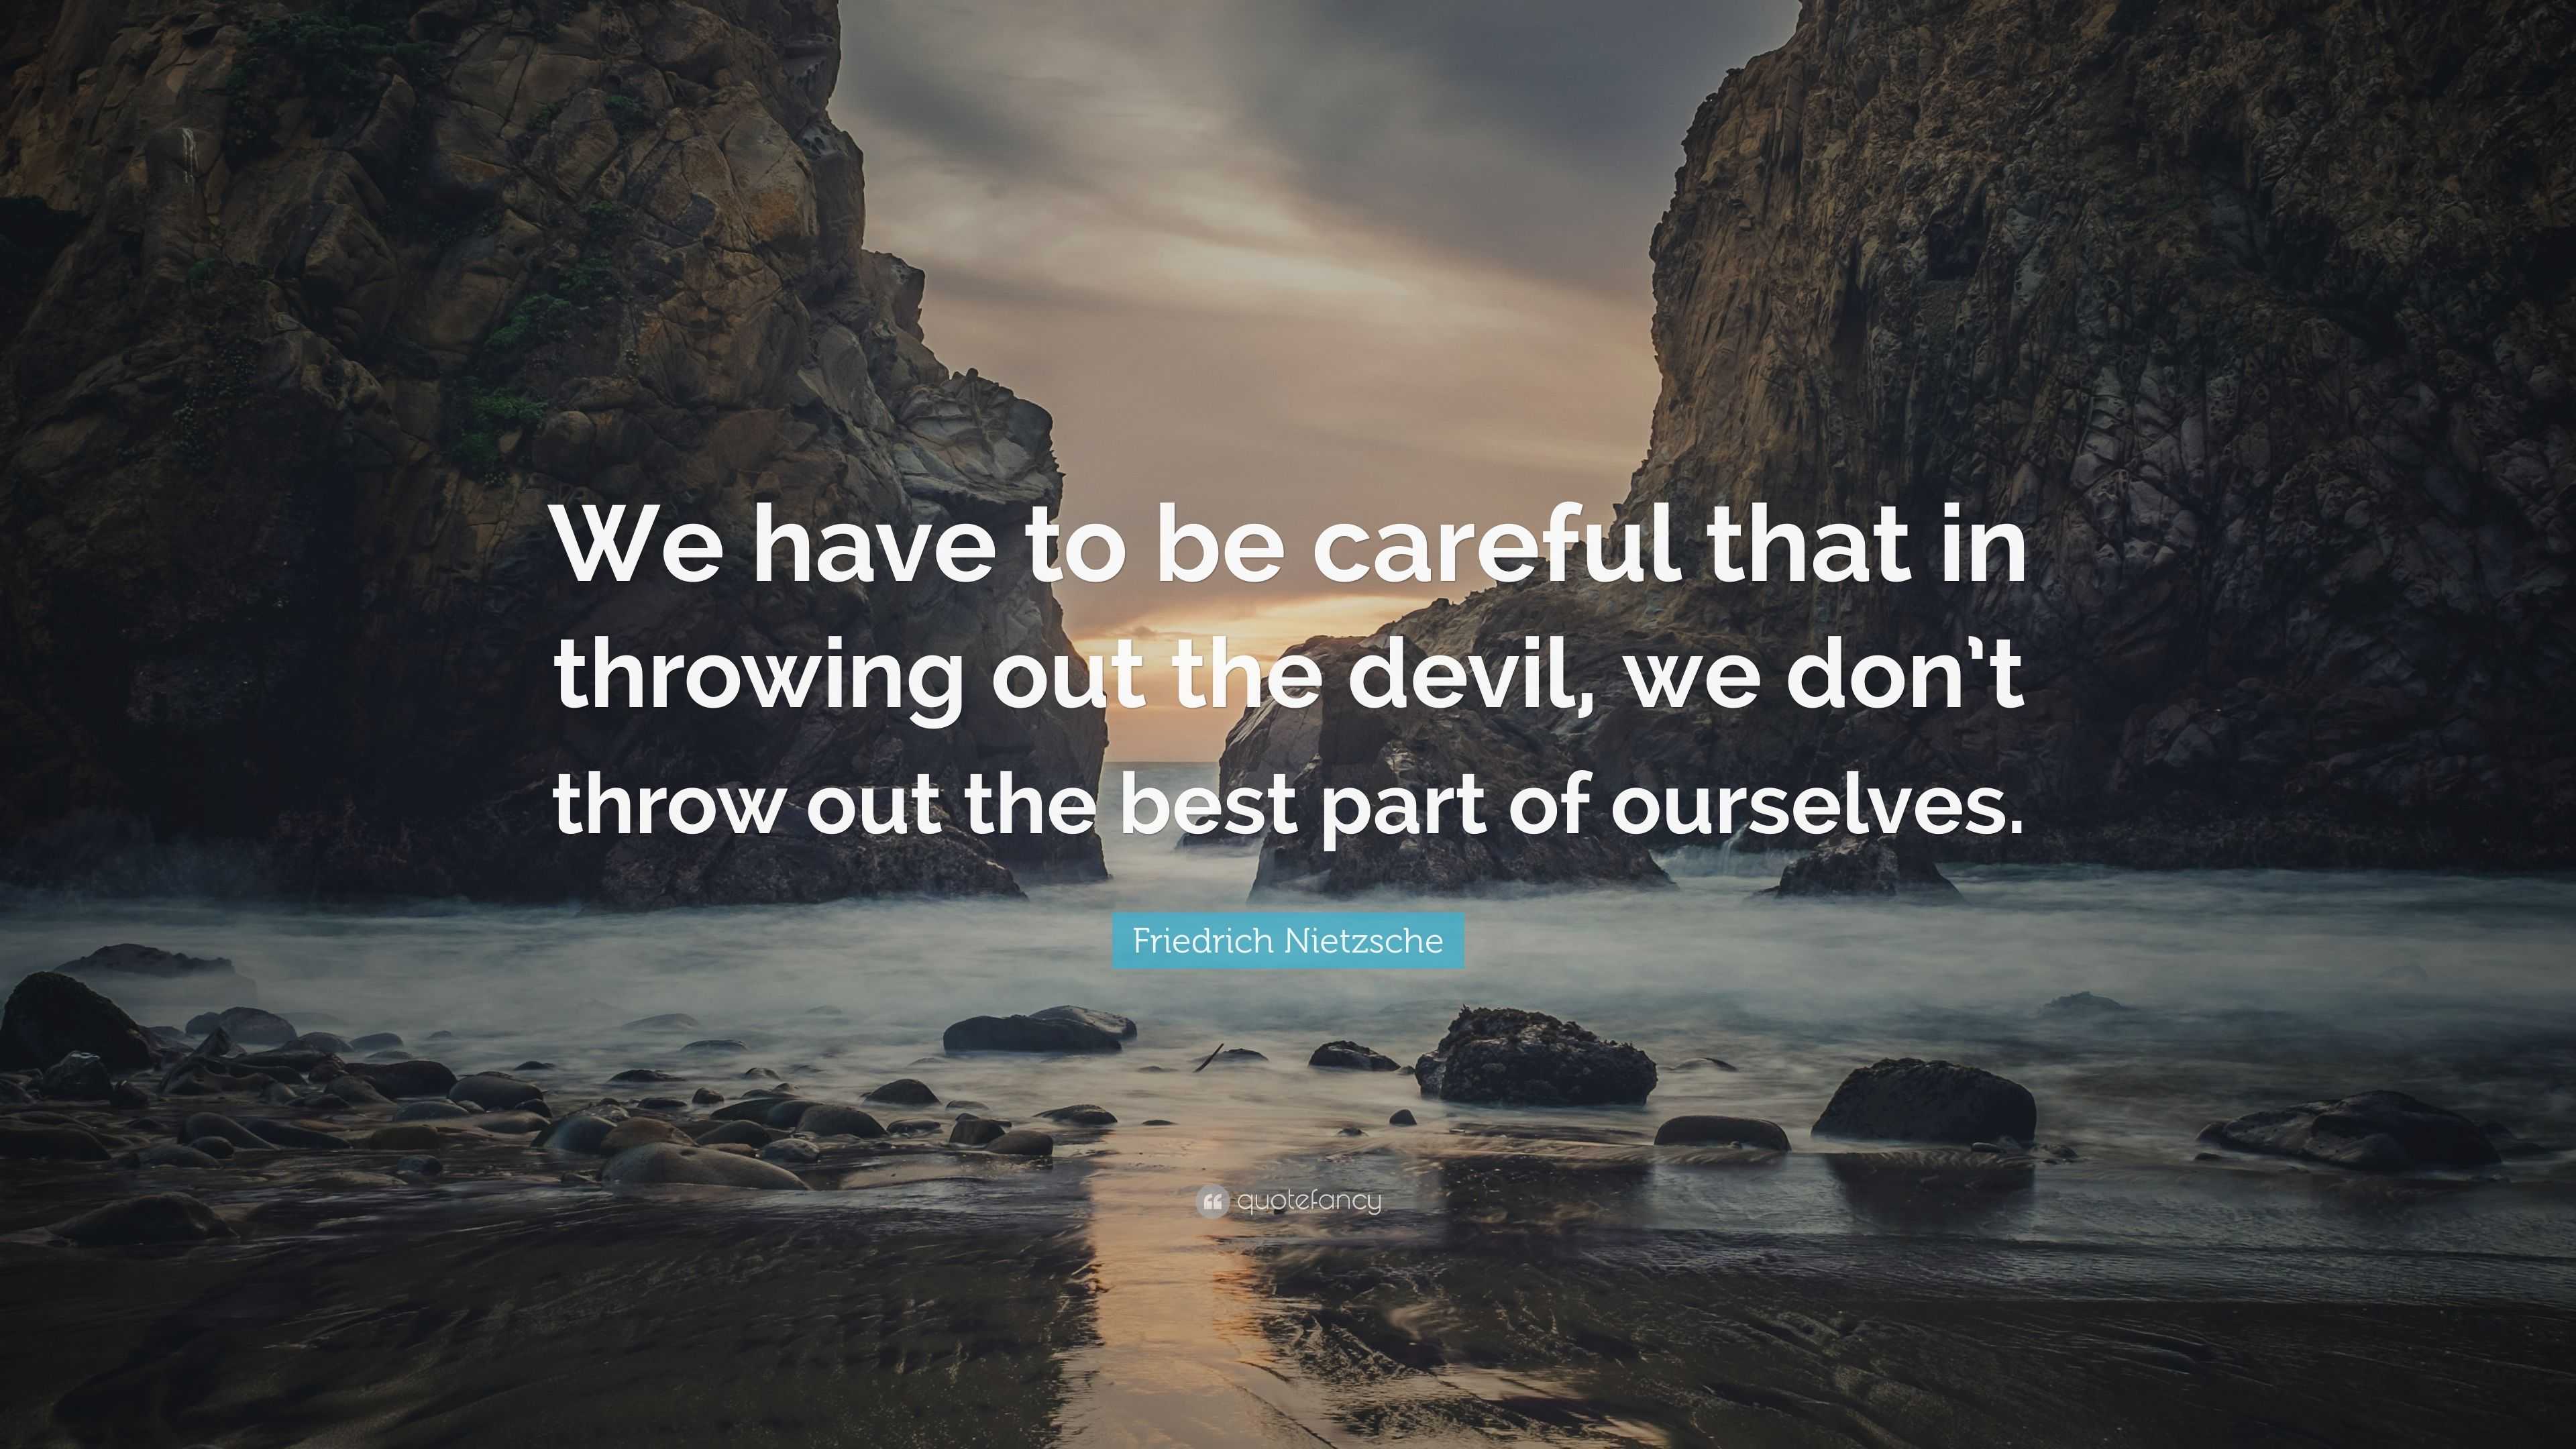 Friedrich Nietzsche Quote: “We have to be careful that in throwing out ...